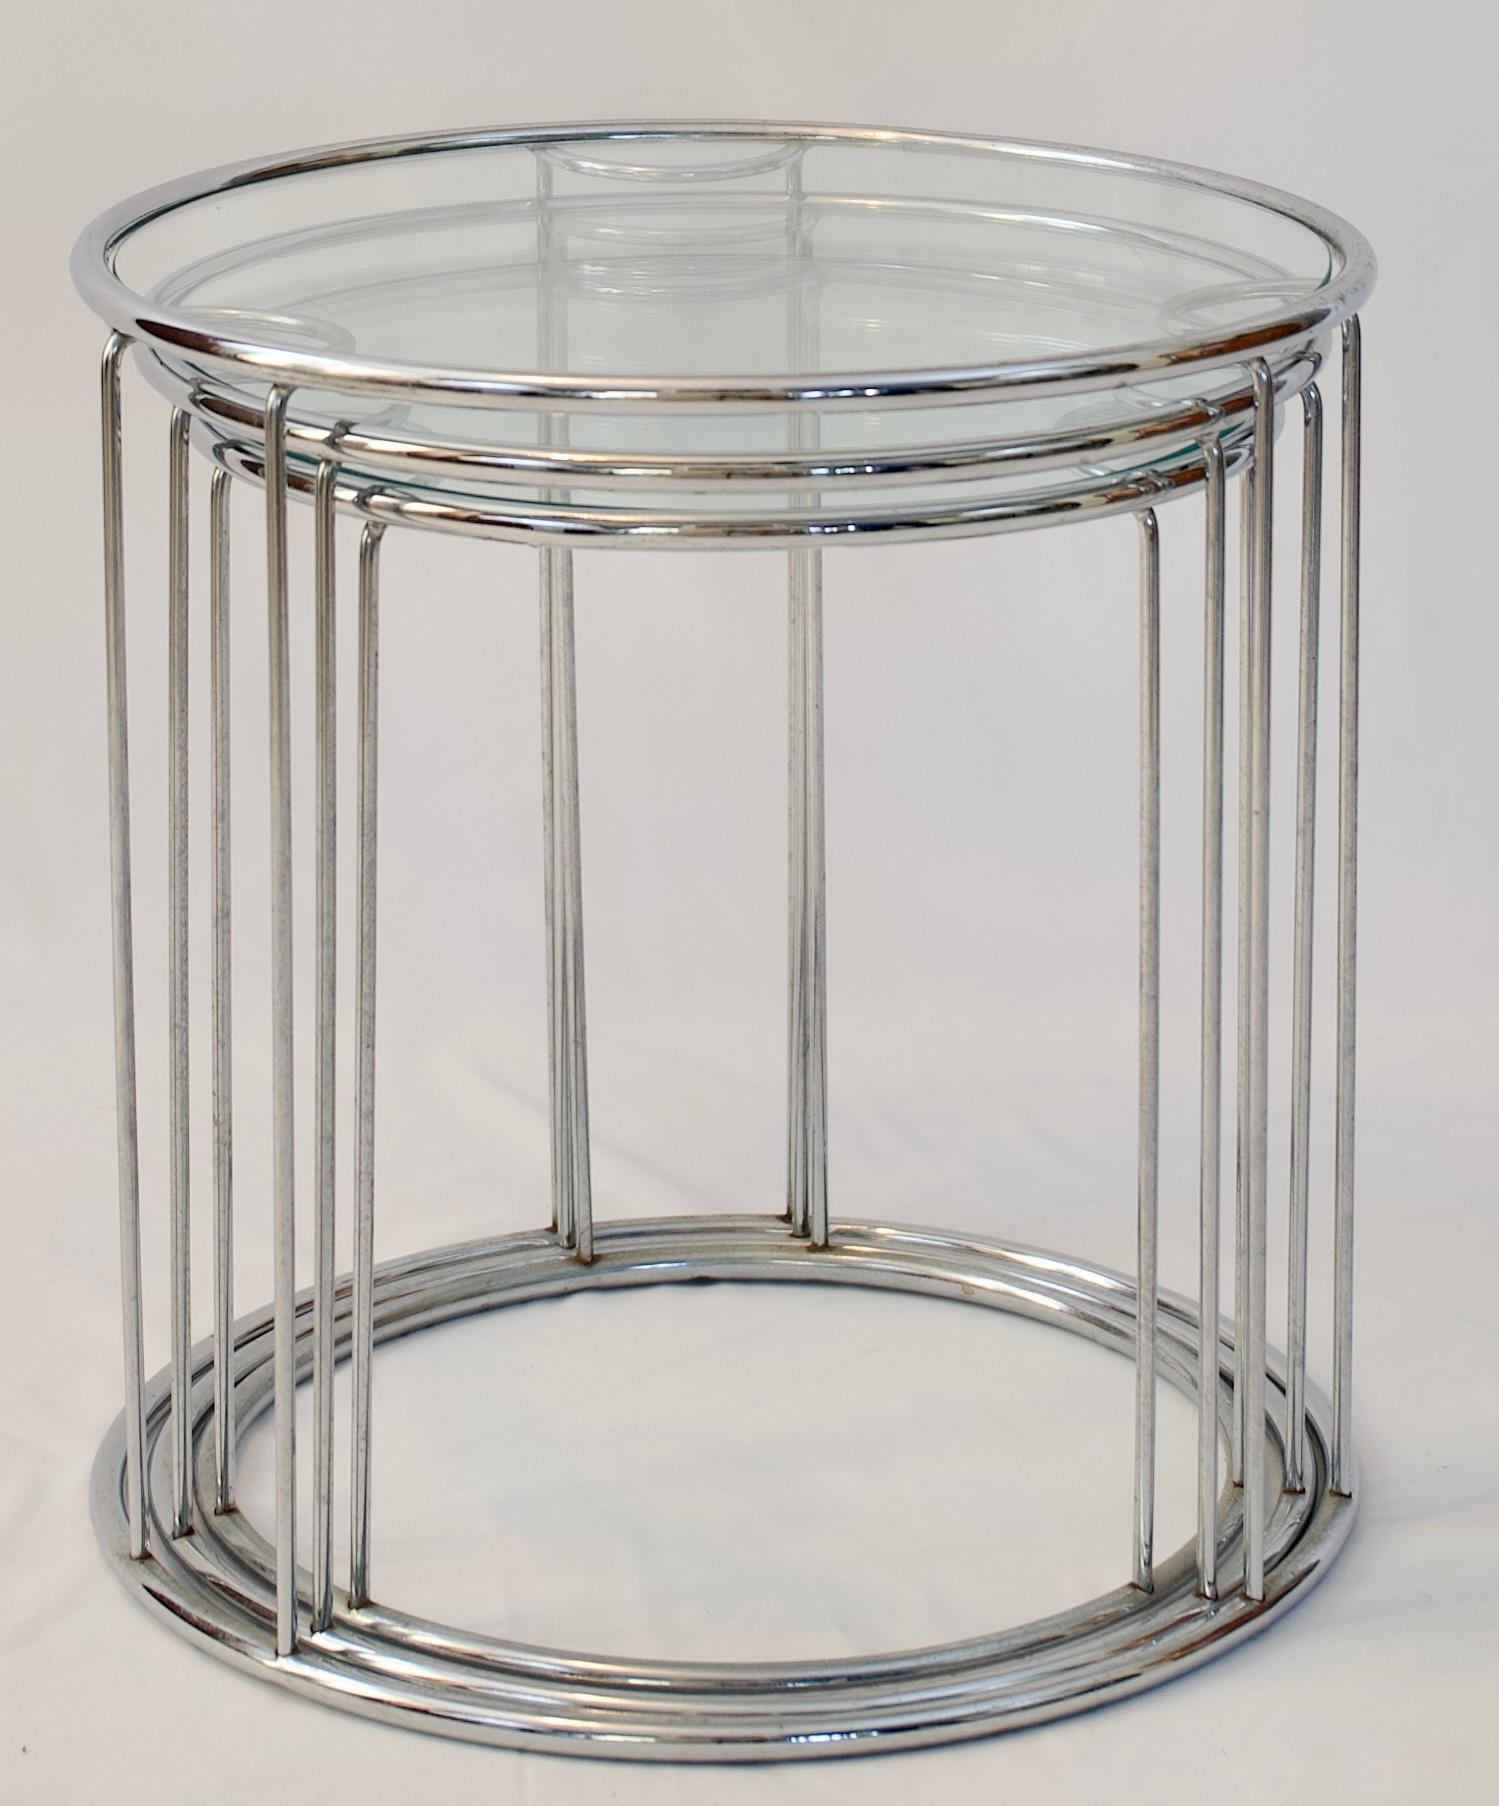 Set of Three Round Chrome and Glass Nesting End Tables Milo Baughman Style For Sale 1